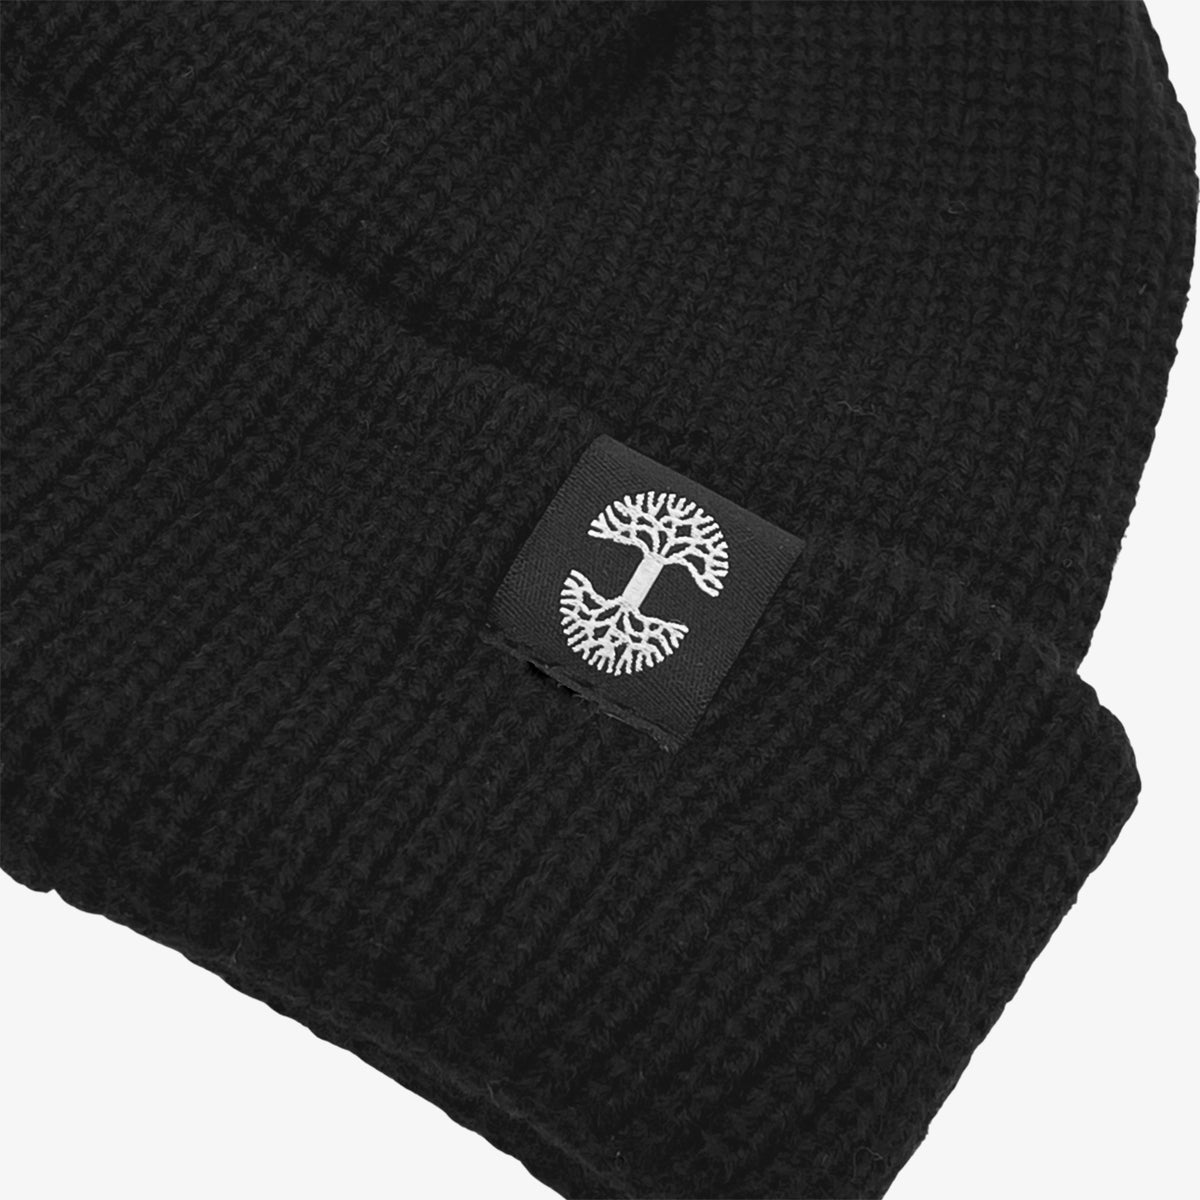 Close up of black and white Oaklandish tree logo tag on the left wear side of a shallow fit black cuffed beanie.